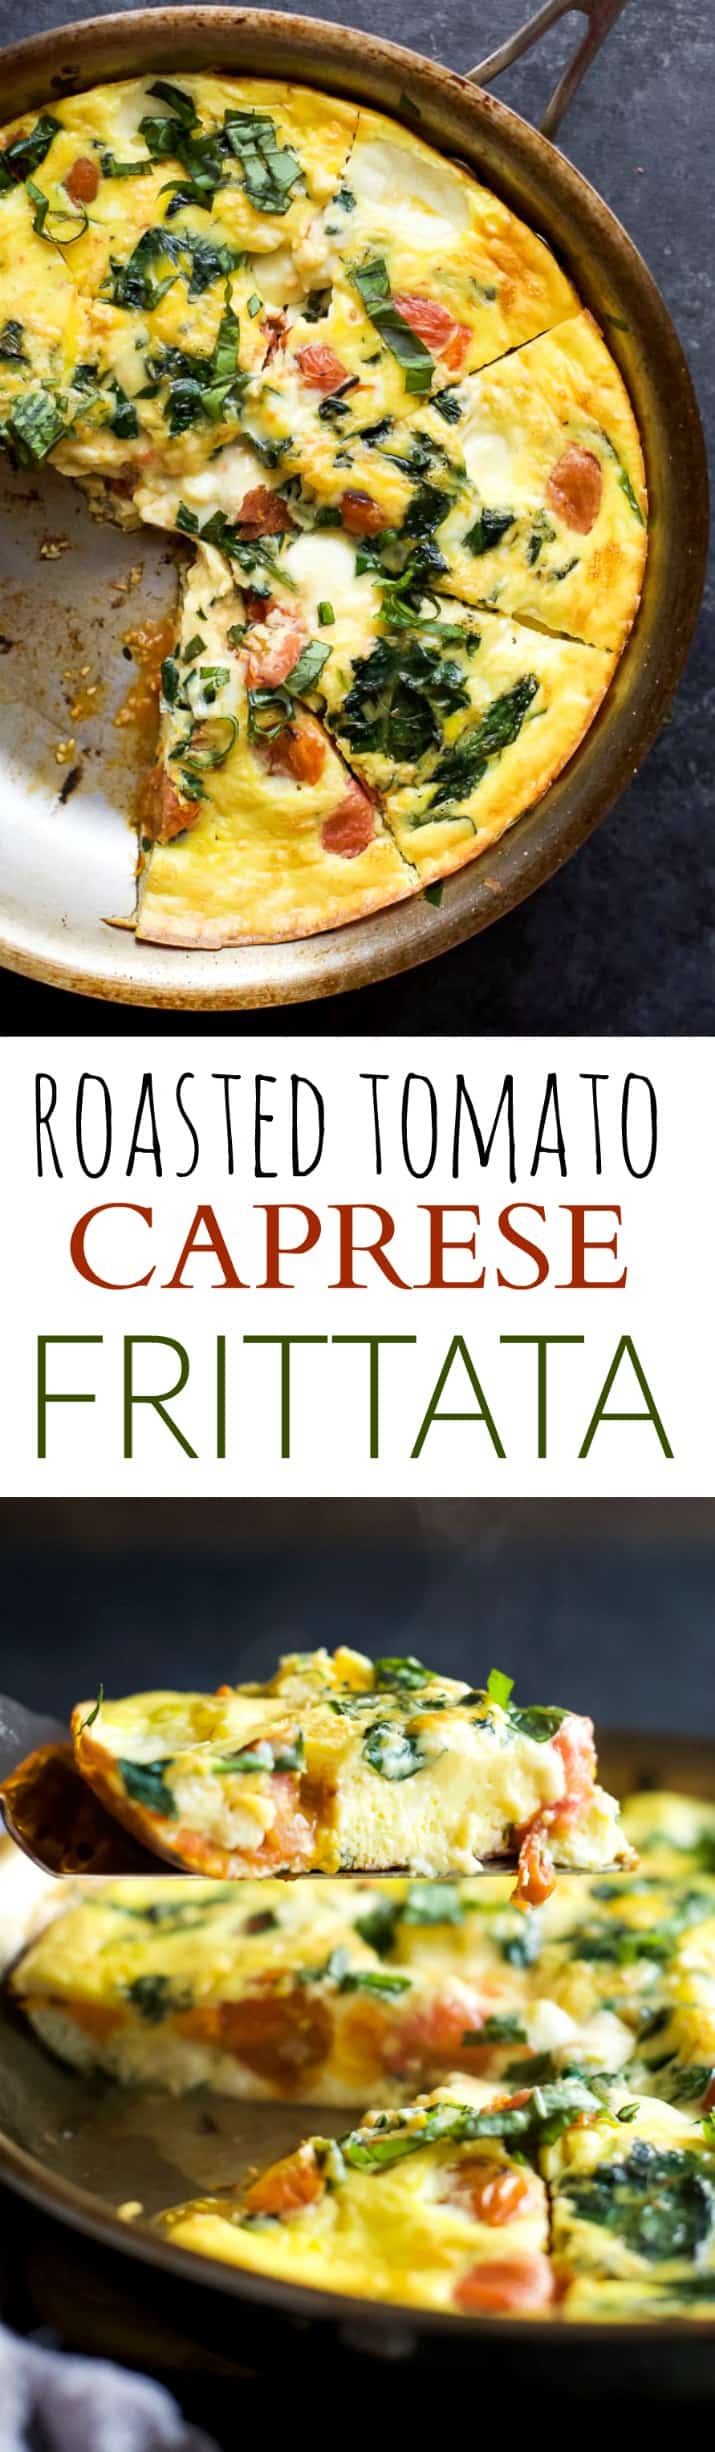 ROASTED TOMATO CAPRESE FRITTATA, an easy yet fancy looking holiday recipe that's perfect for breakfast, brunch or lunch! Filled with melted mozzarella, fresh basil, garlic infused spinach and roasted tomato - it's pretty much divine! | joyfulhealthyeats.com